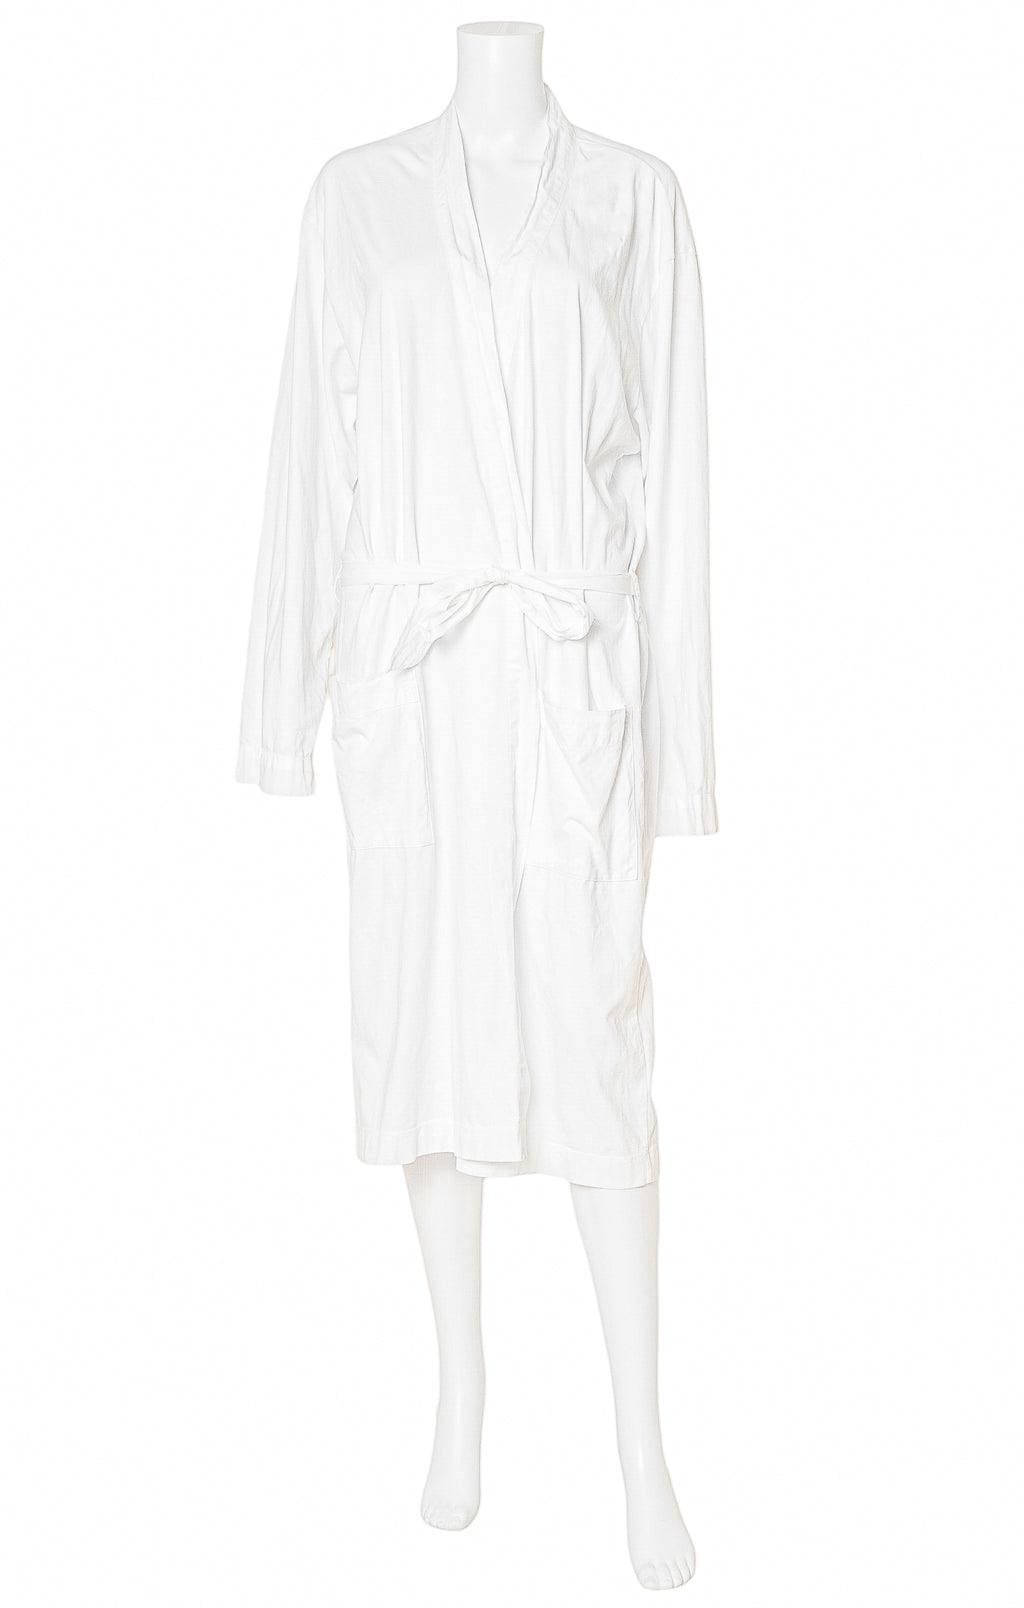 JAMES PERSE (NEW) with tags Robe Size: O/S